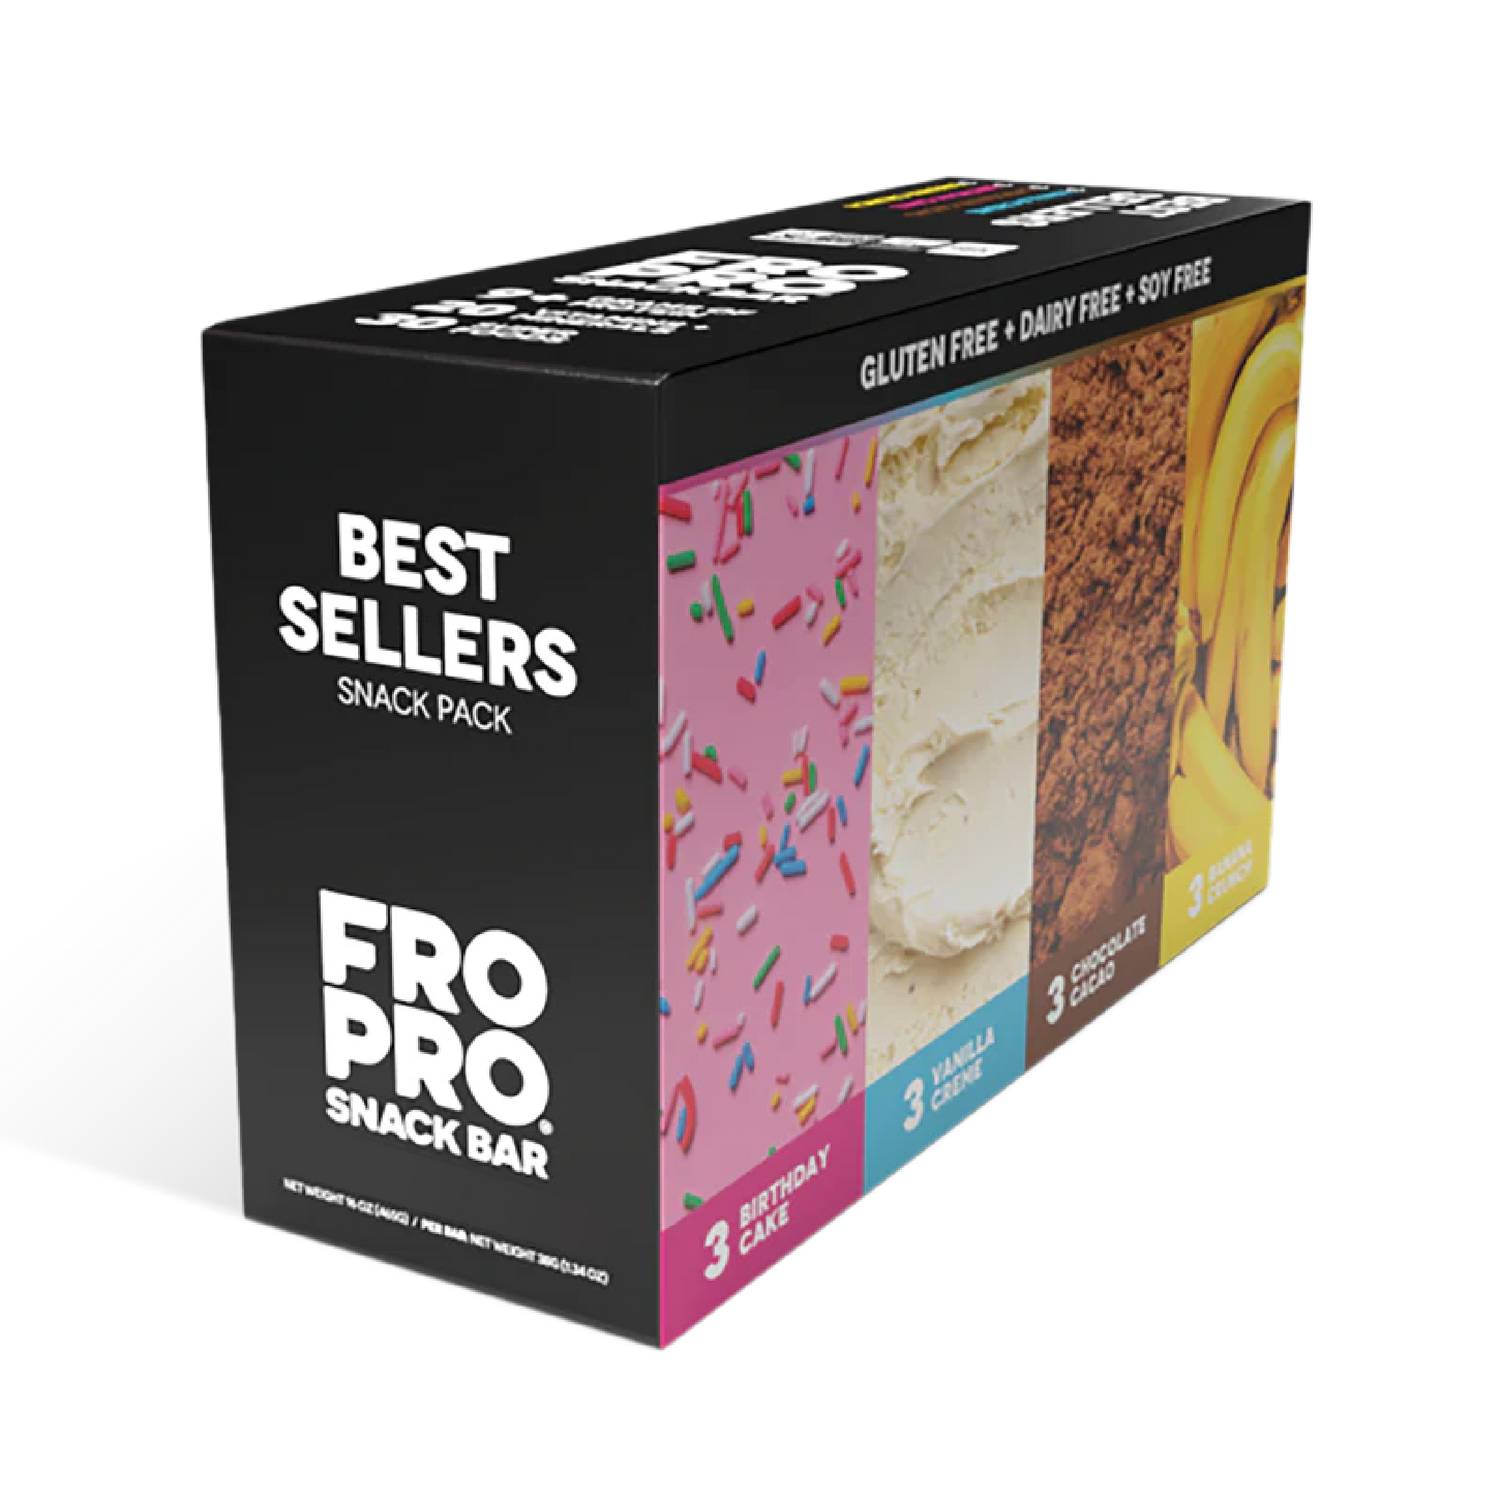 Best Sellers FROPRO Variety Pack